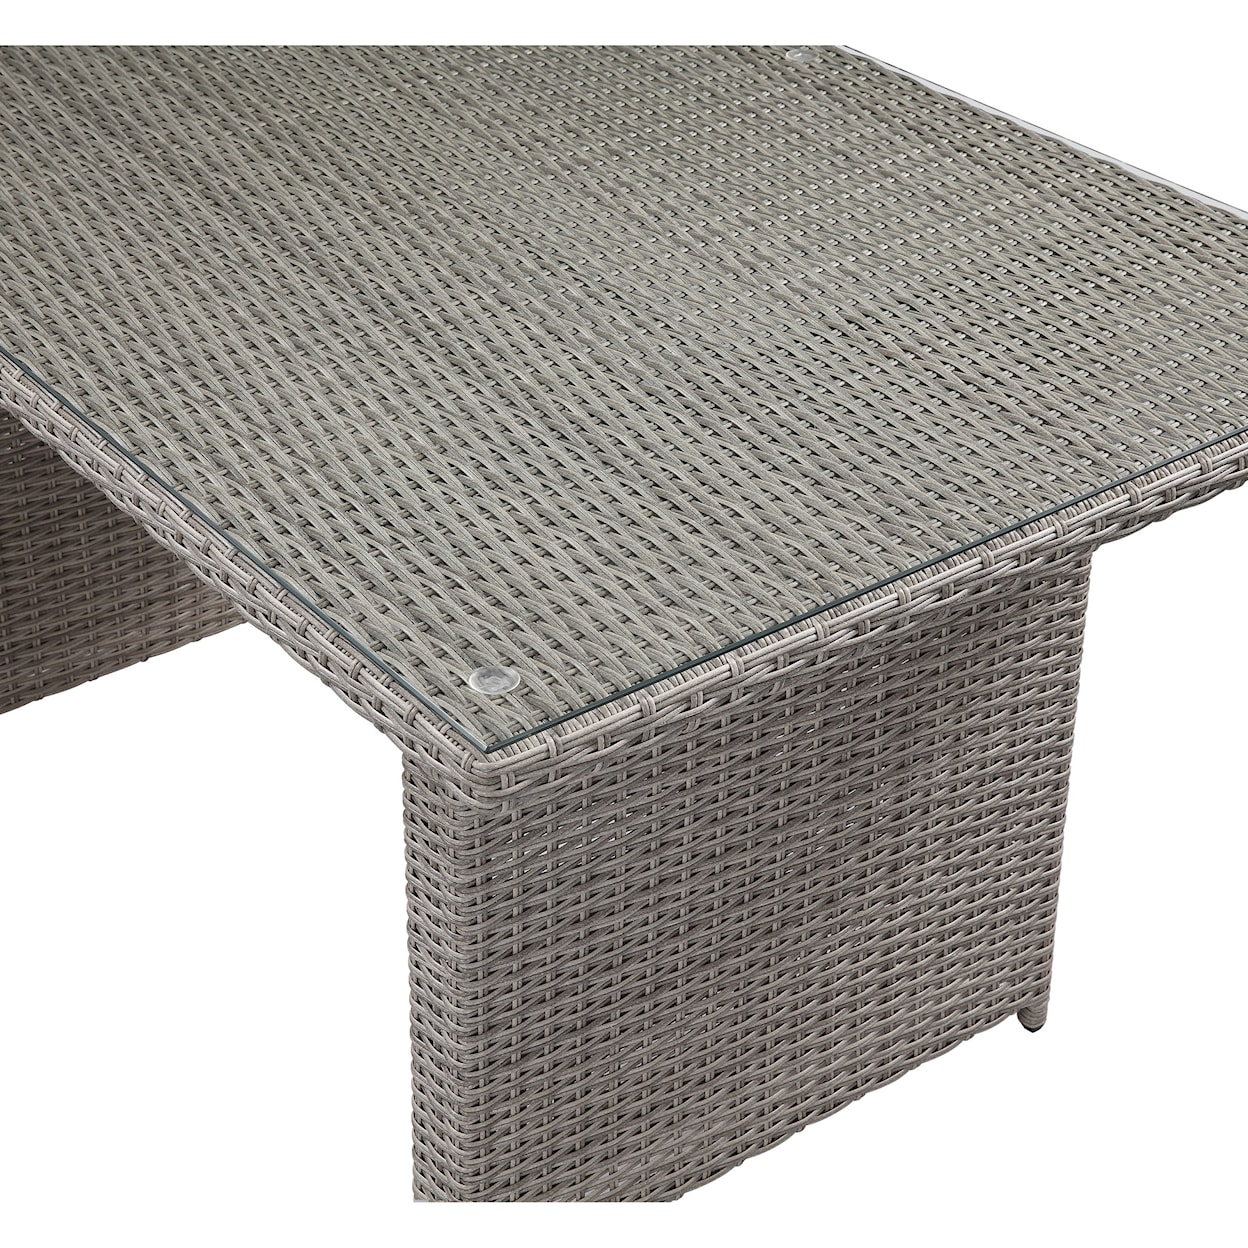 Acme Furniture Tahan Outdoor Dining Table